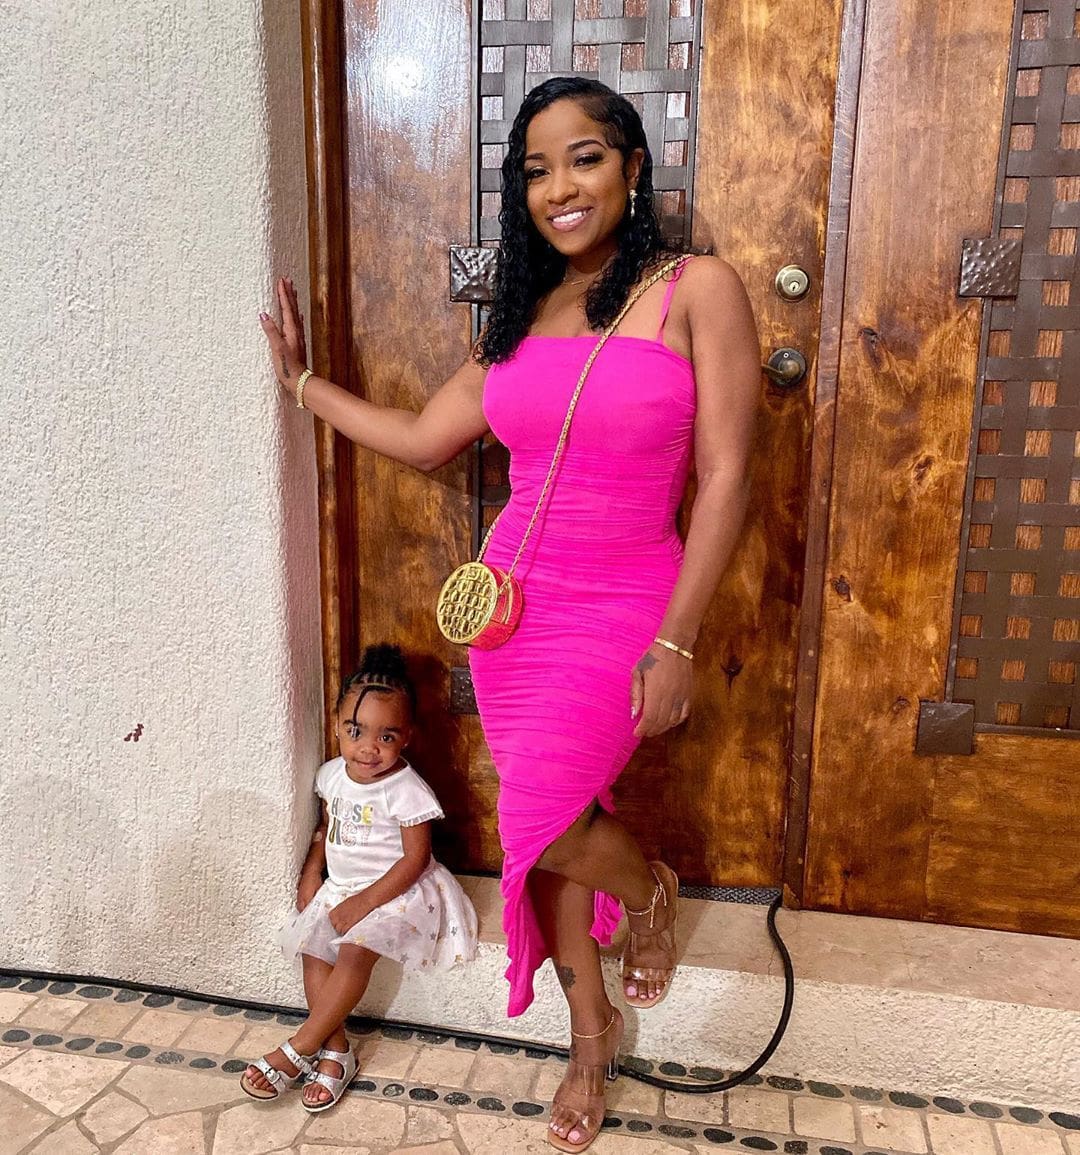 Toya Johnson Is Showing Off A Gorgeous New Look And Fans Are In Love - See Her Latest Announcement